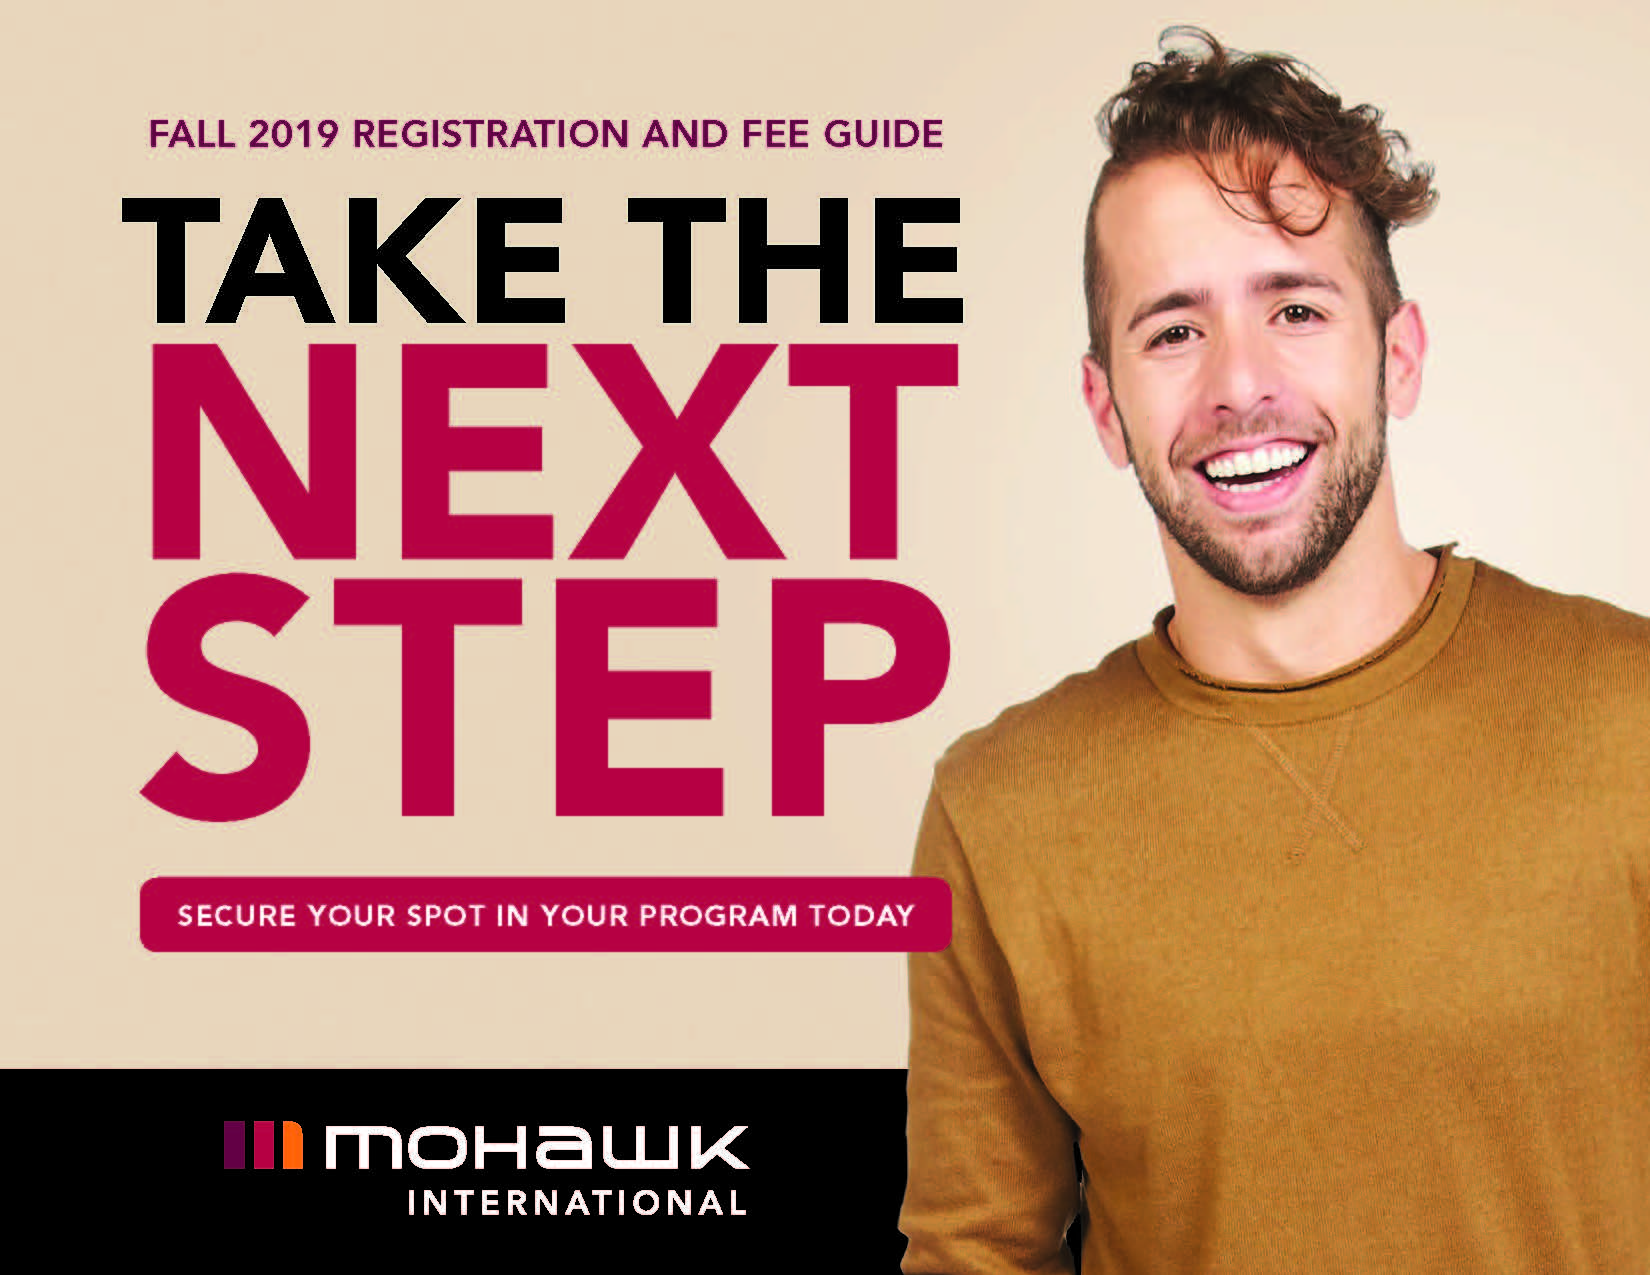 Fall 2019 International Registration and Fee Guide